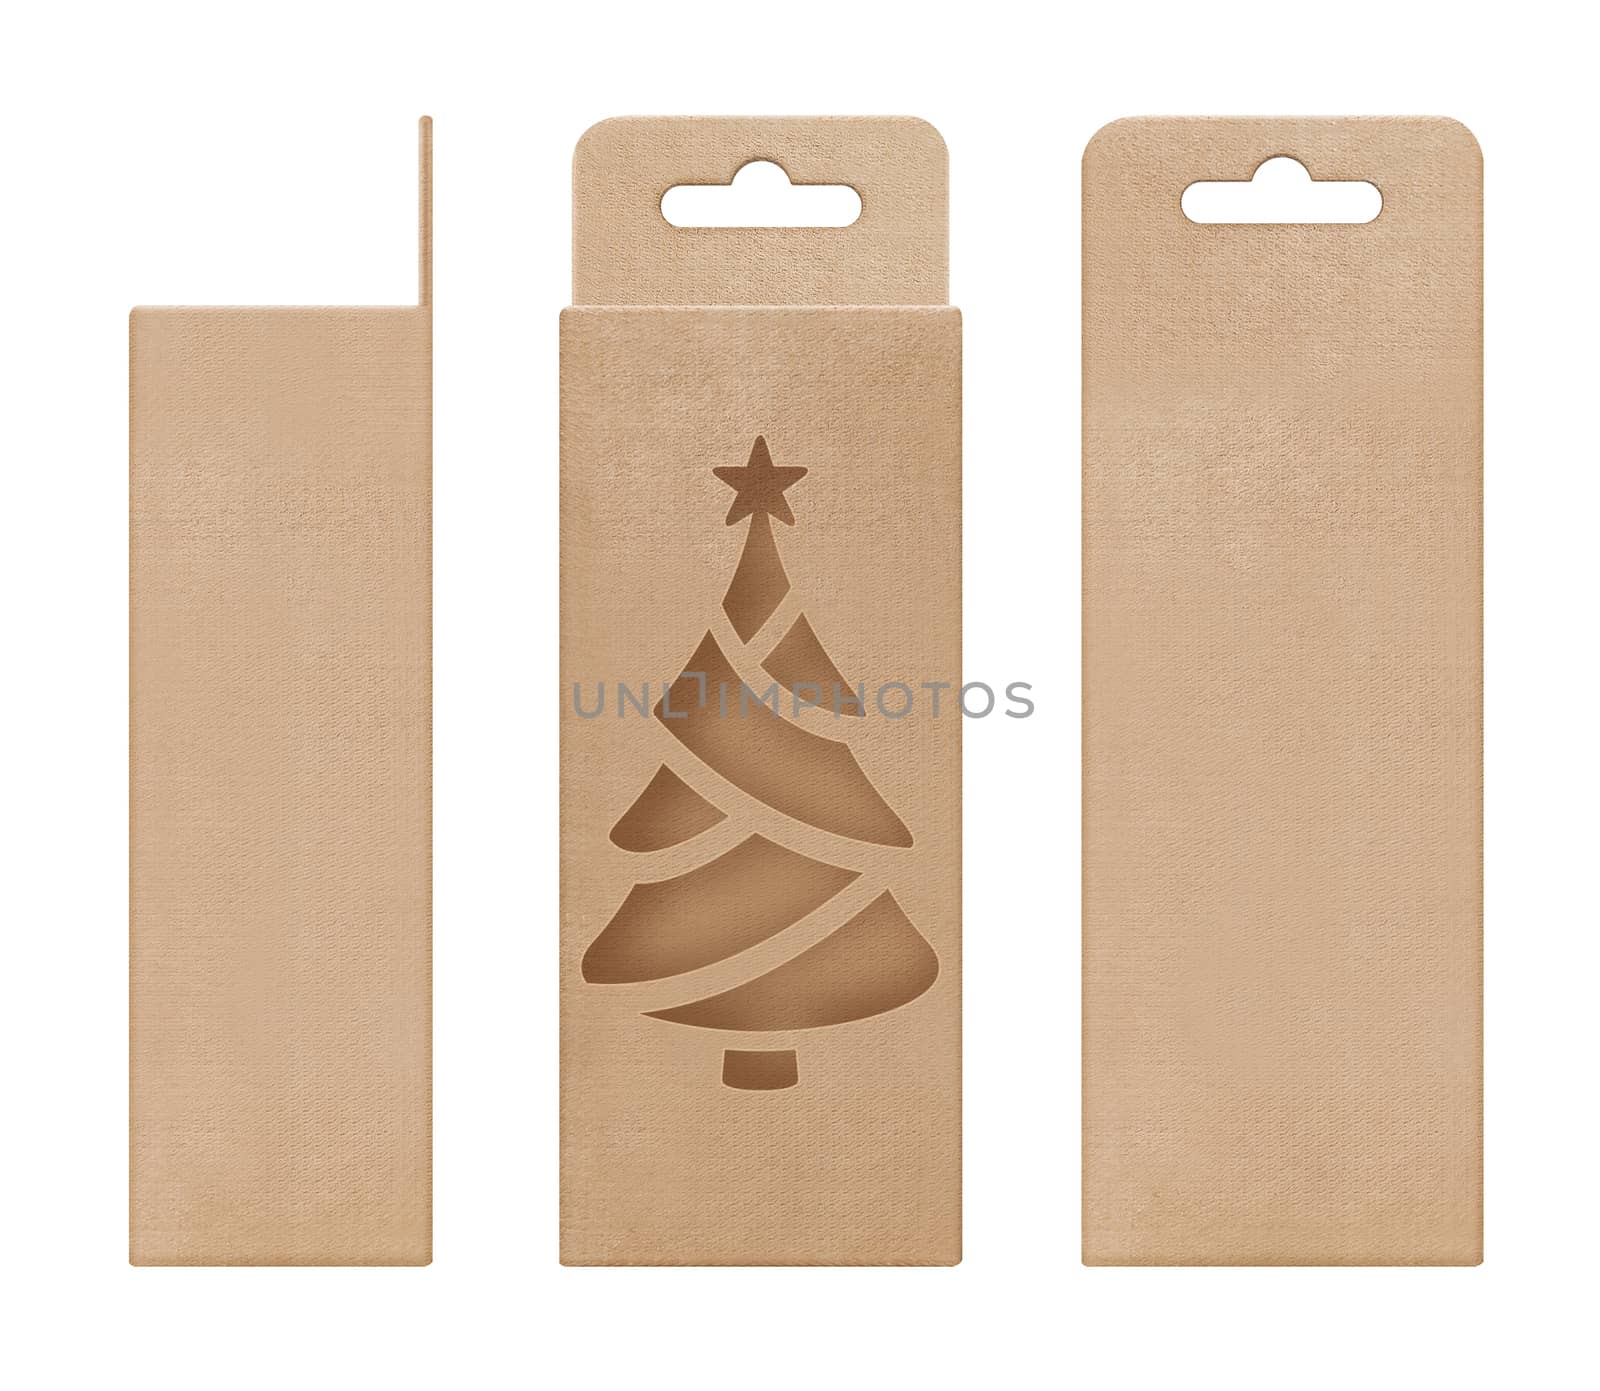 box, packaging, box brown for hanging cut out window Christmas tree shape open blank template for design product package by cgdeaw